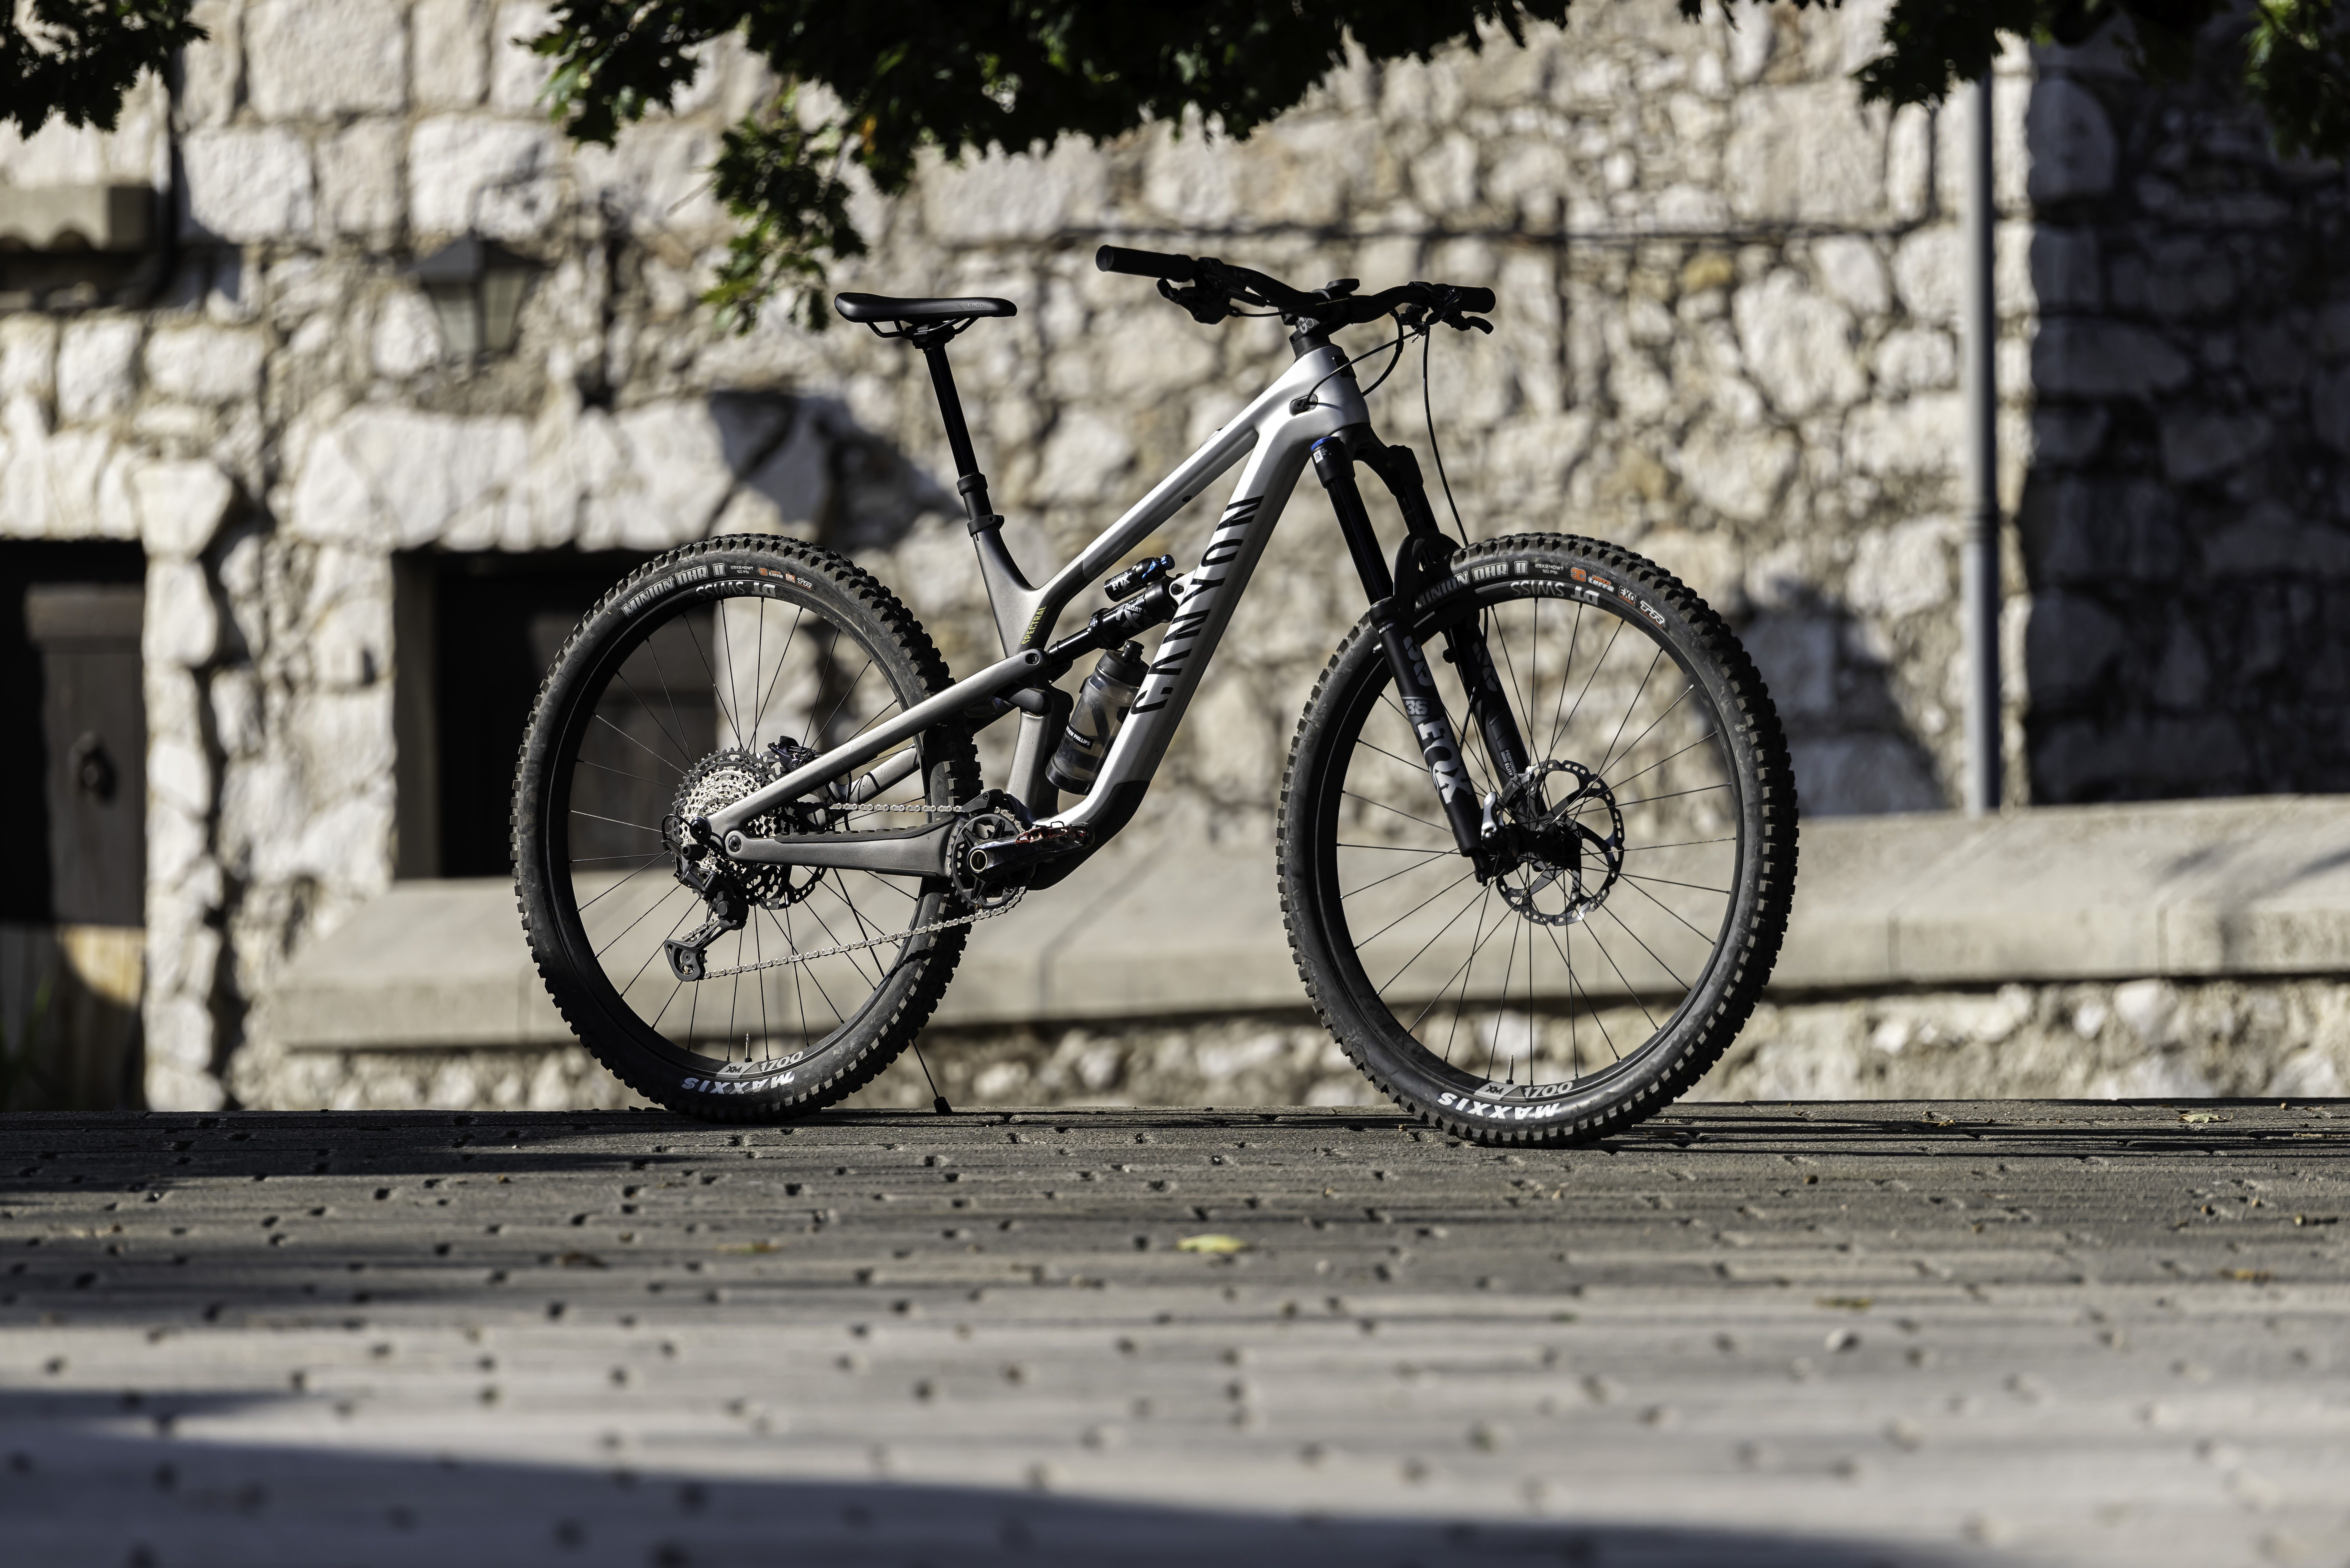 Canyon’s Spectral 29 CF 8 K.I.S. is the first bike to feature the stabilizer. 